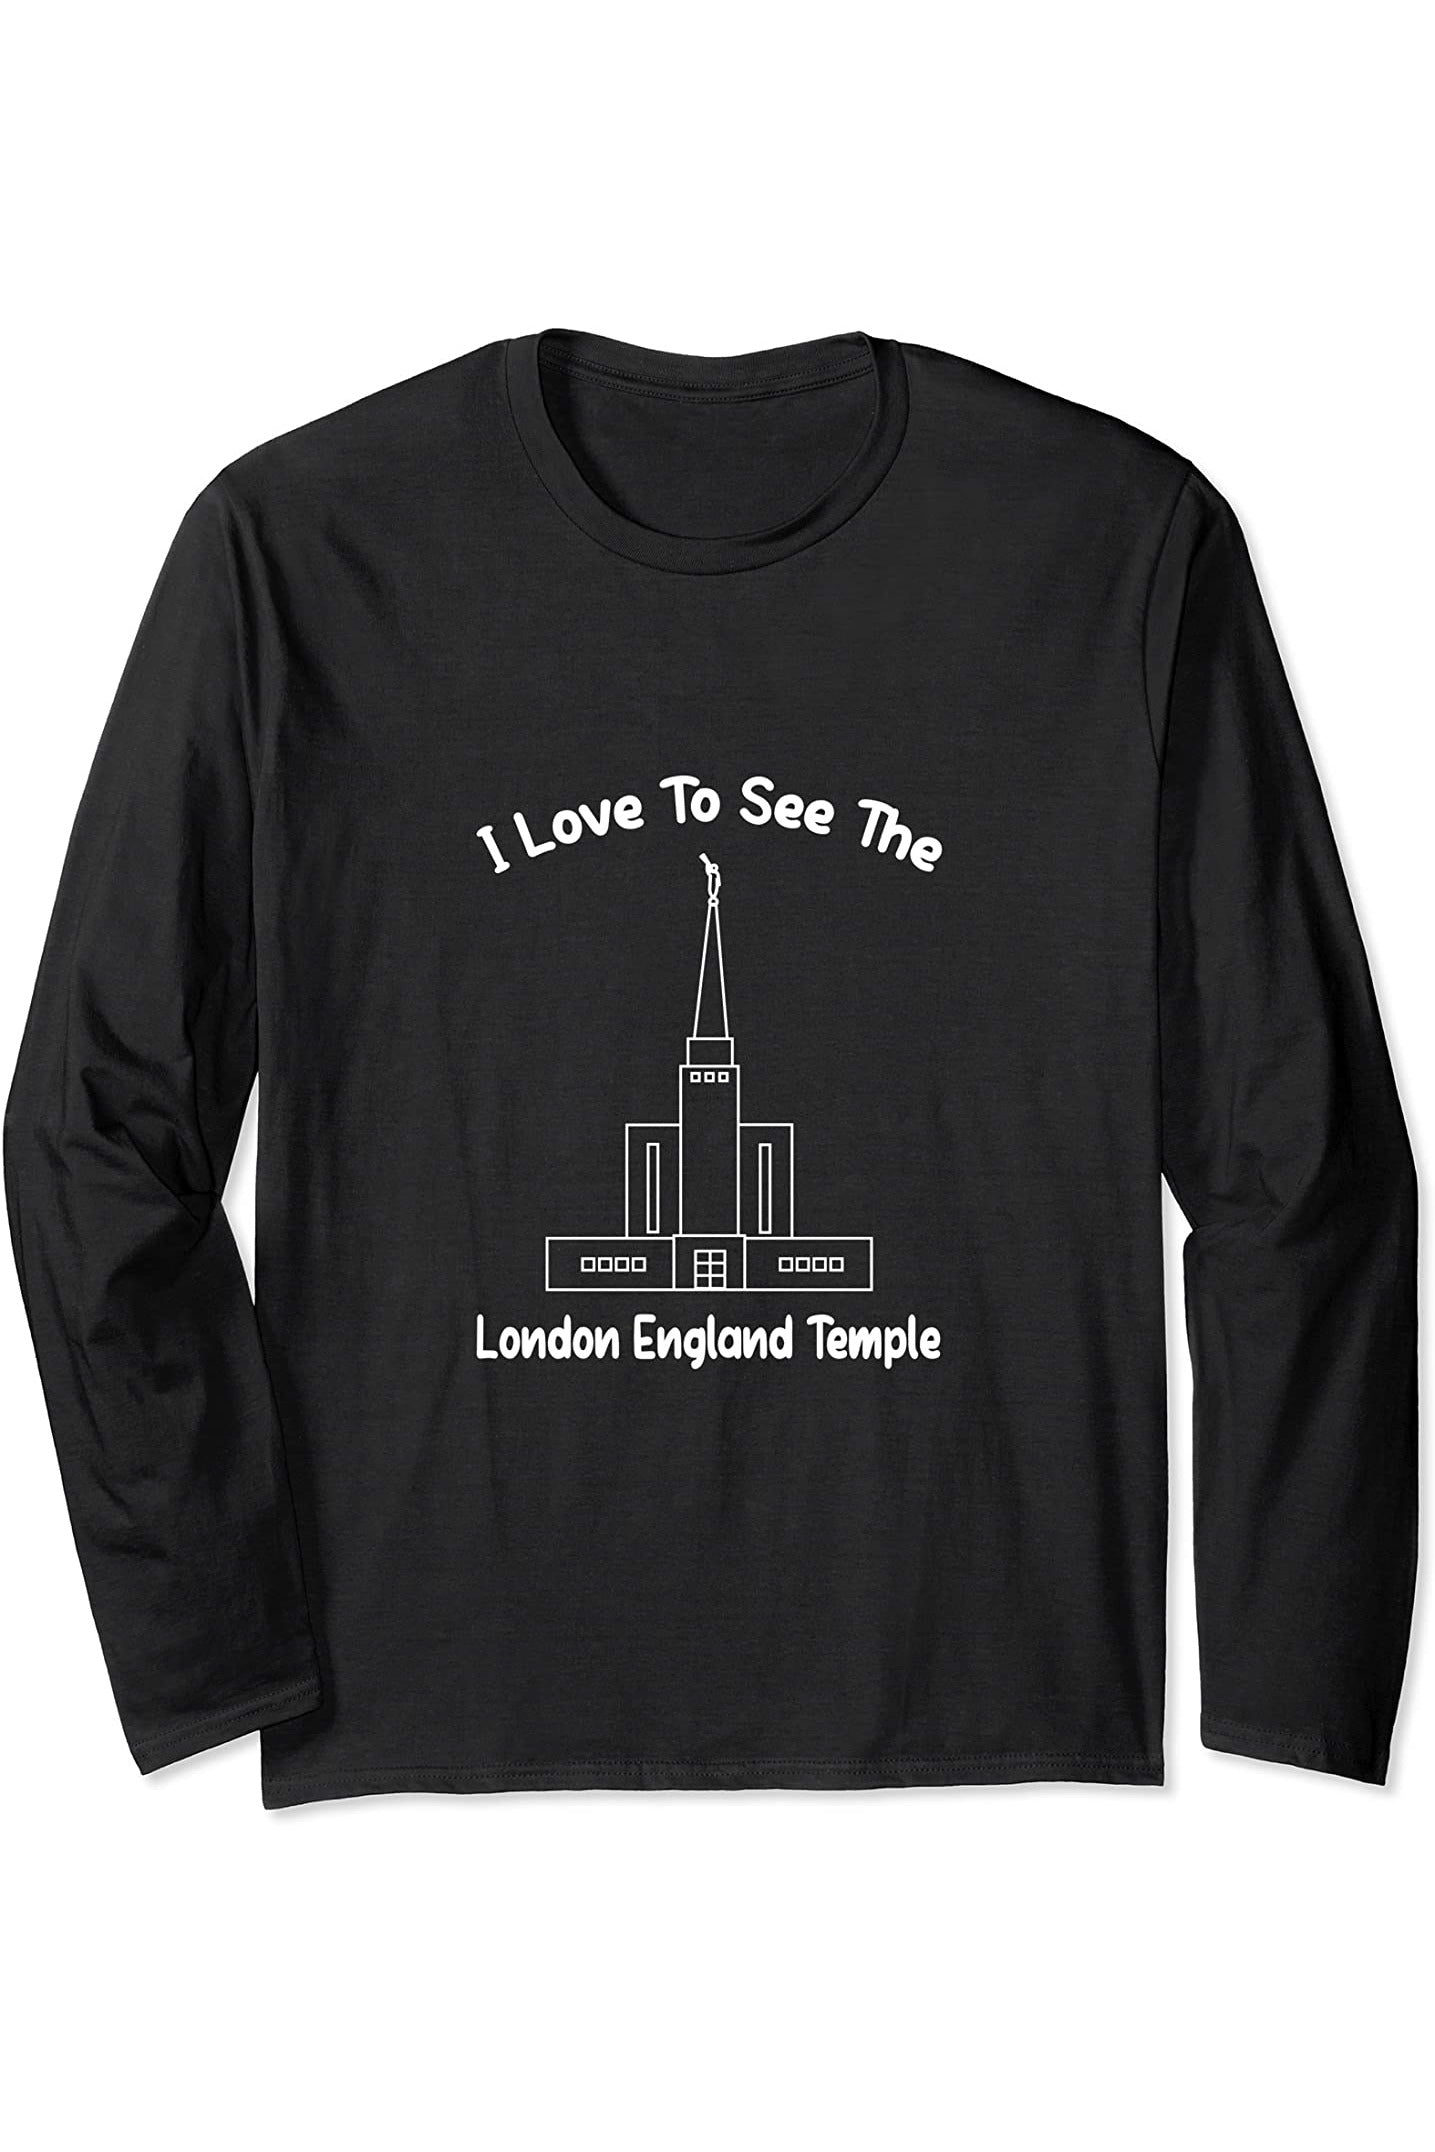 London England Temple I love to see my Tempel, primary Long Sleeve T-Shirt